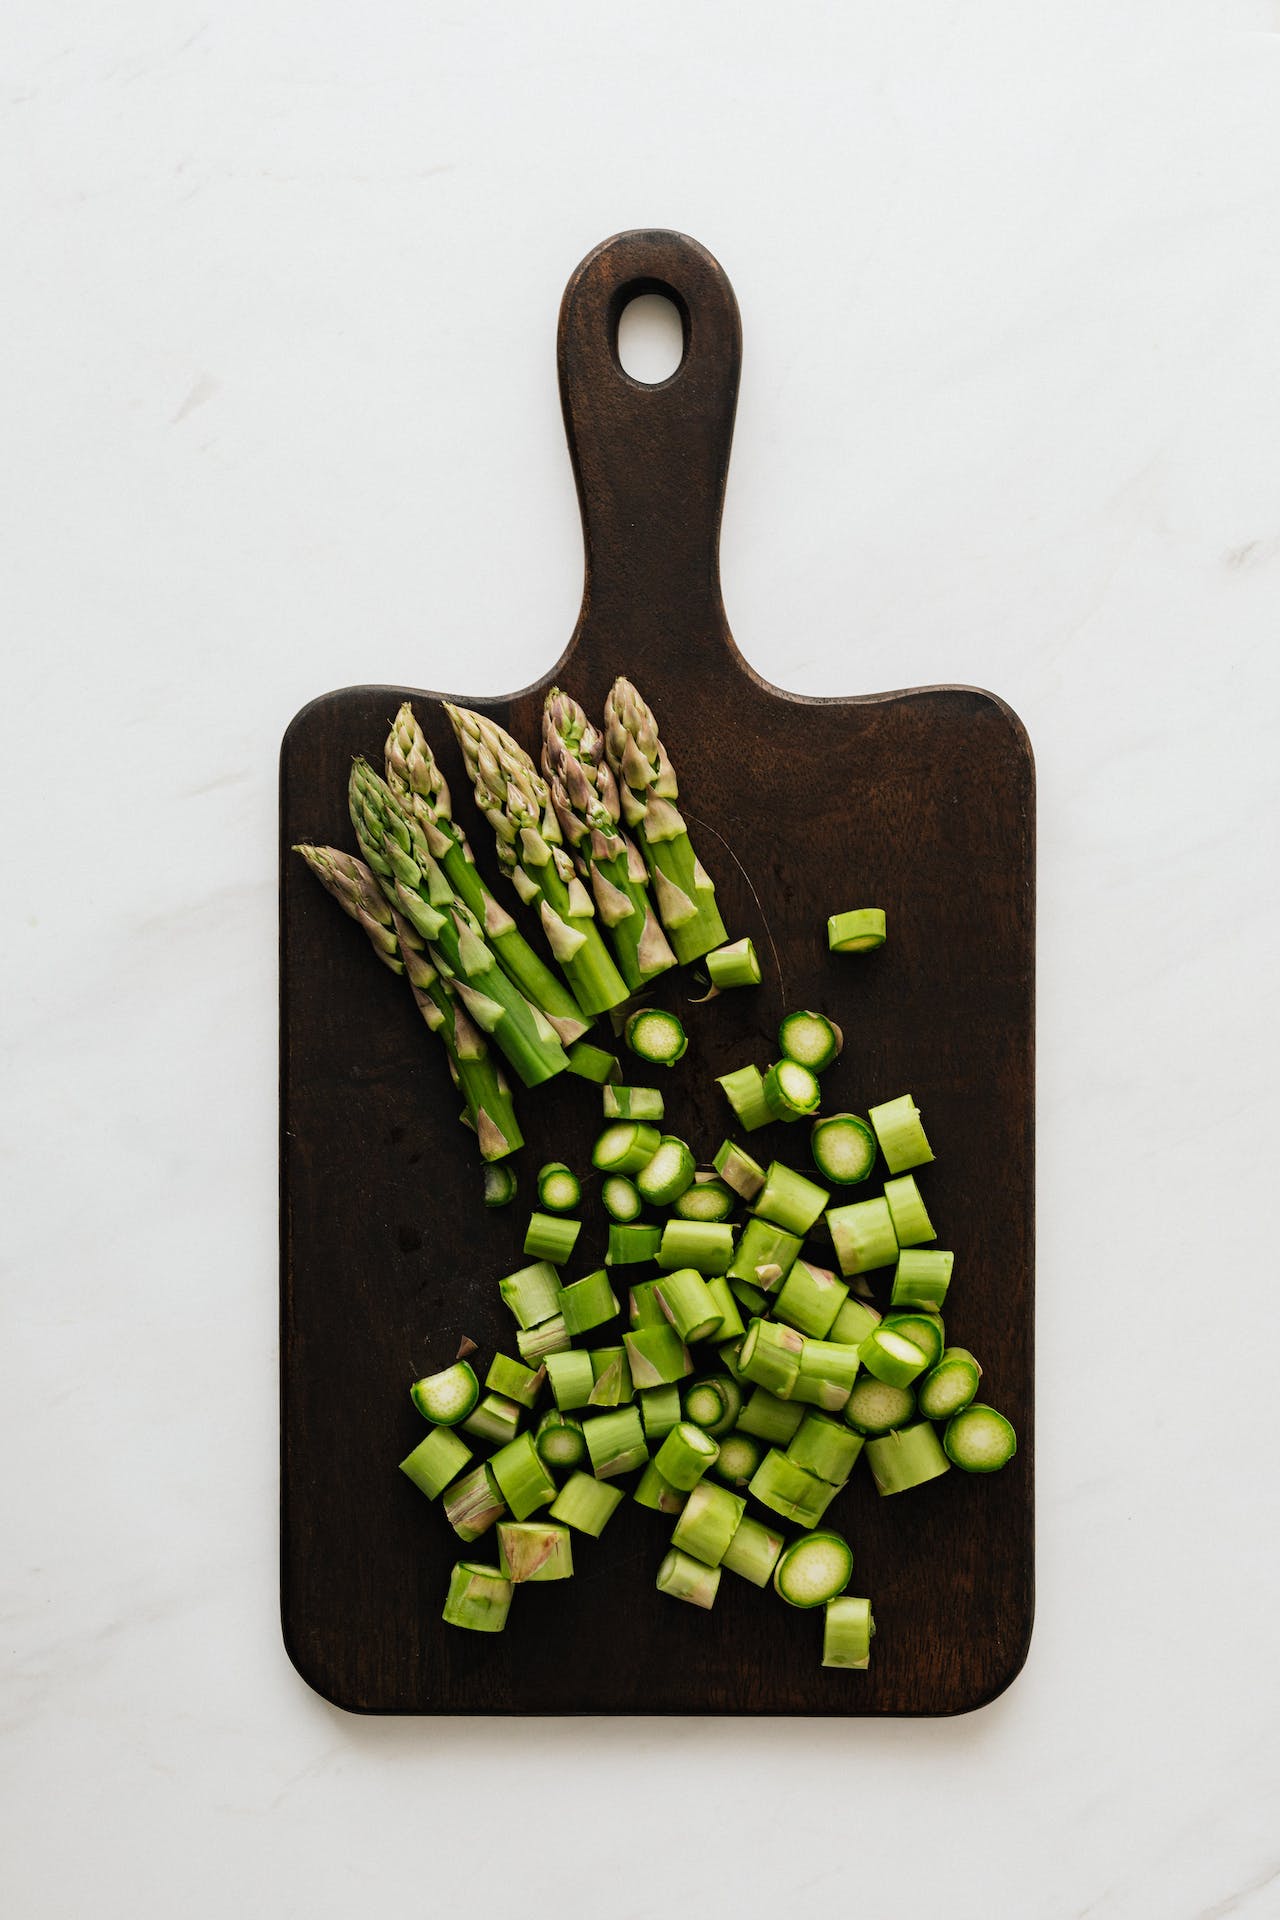 Asparagus in culinary uses